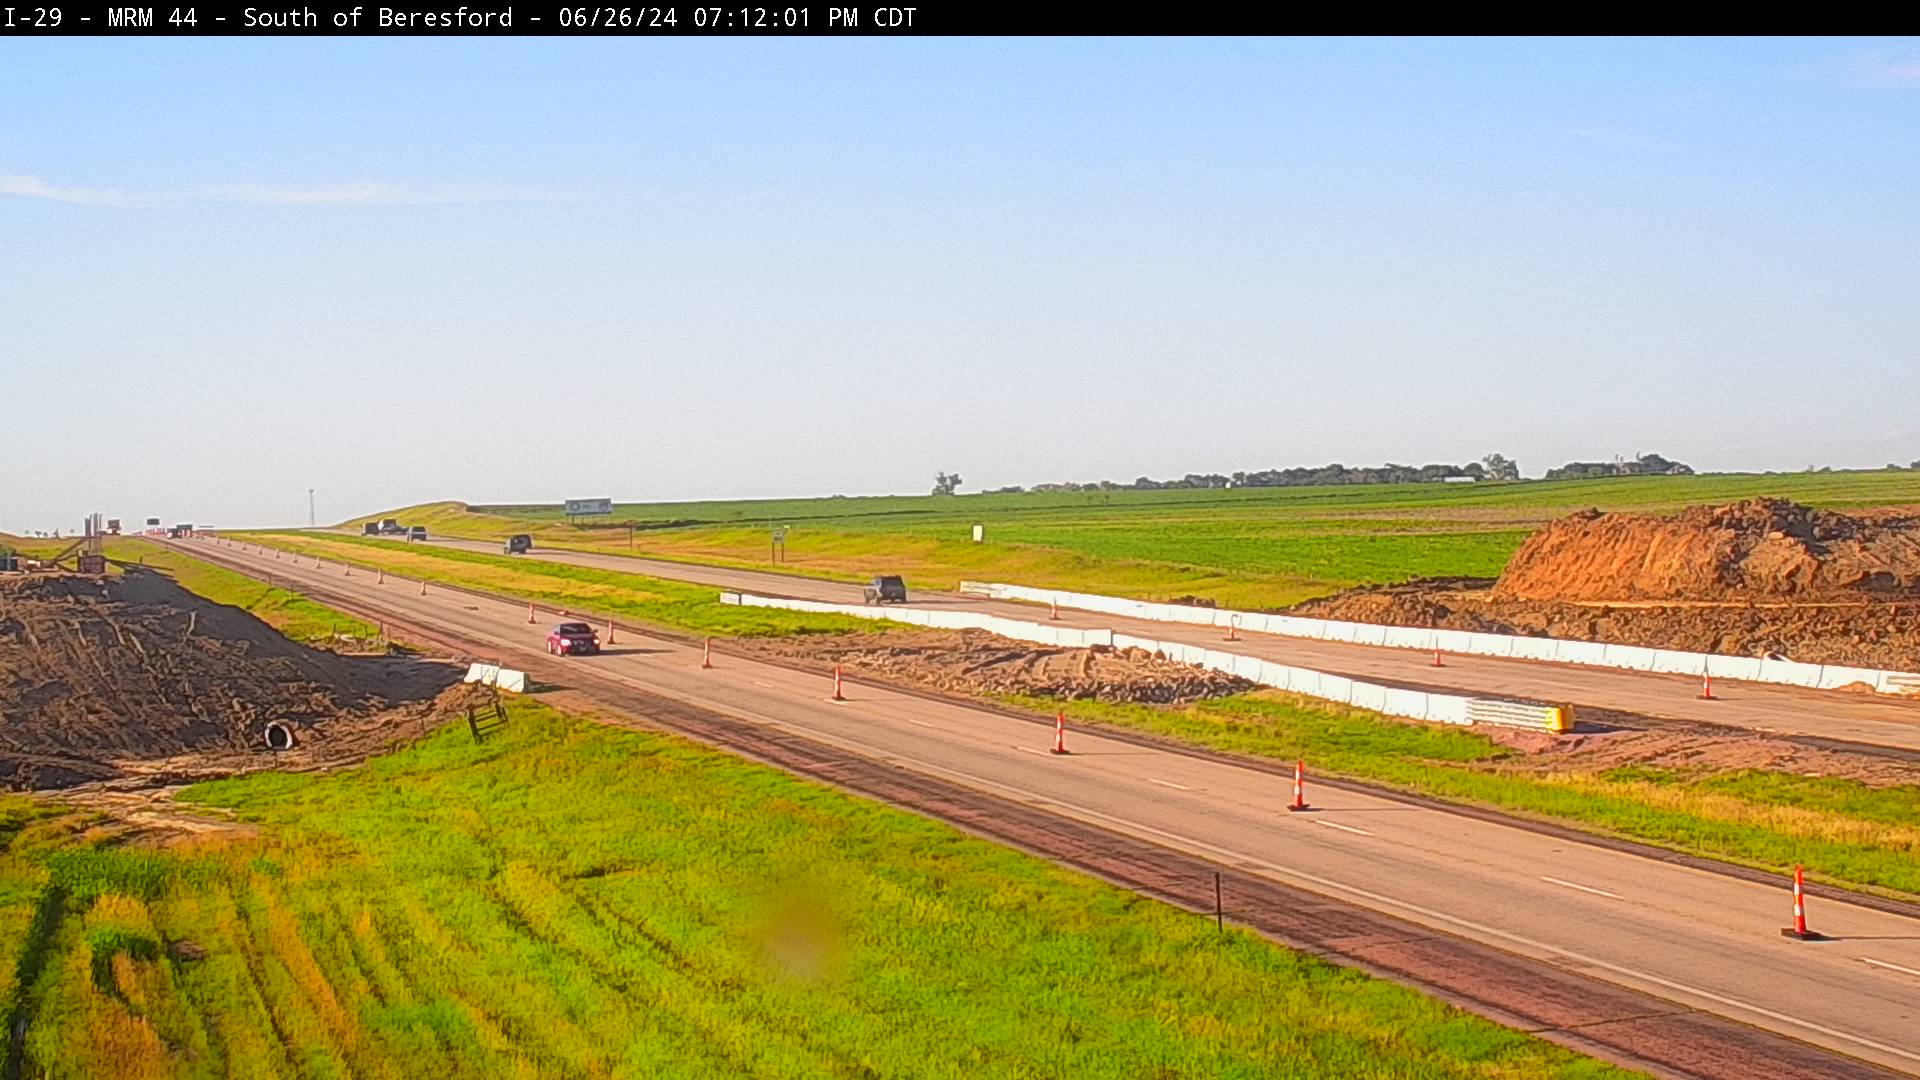 2 miles south of town along I-29 @ MP 44 - North Traffic Camera